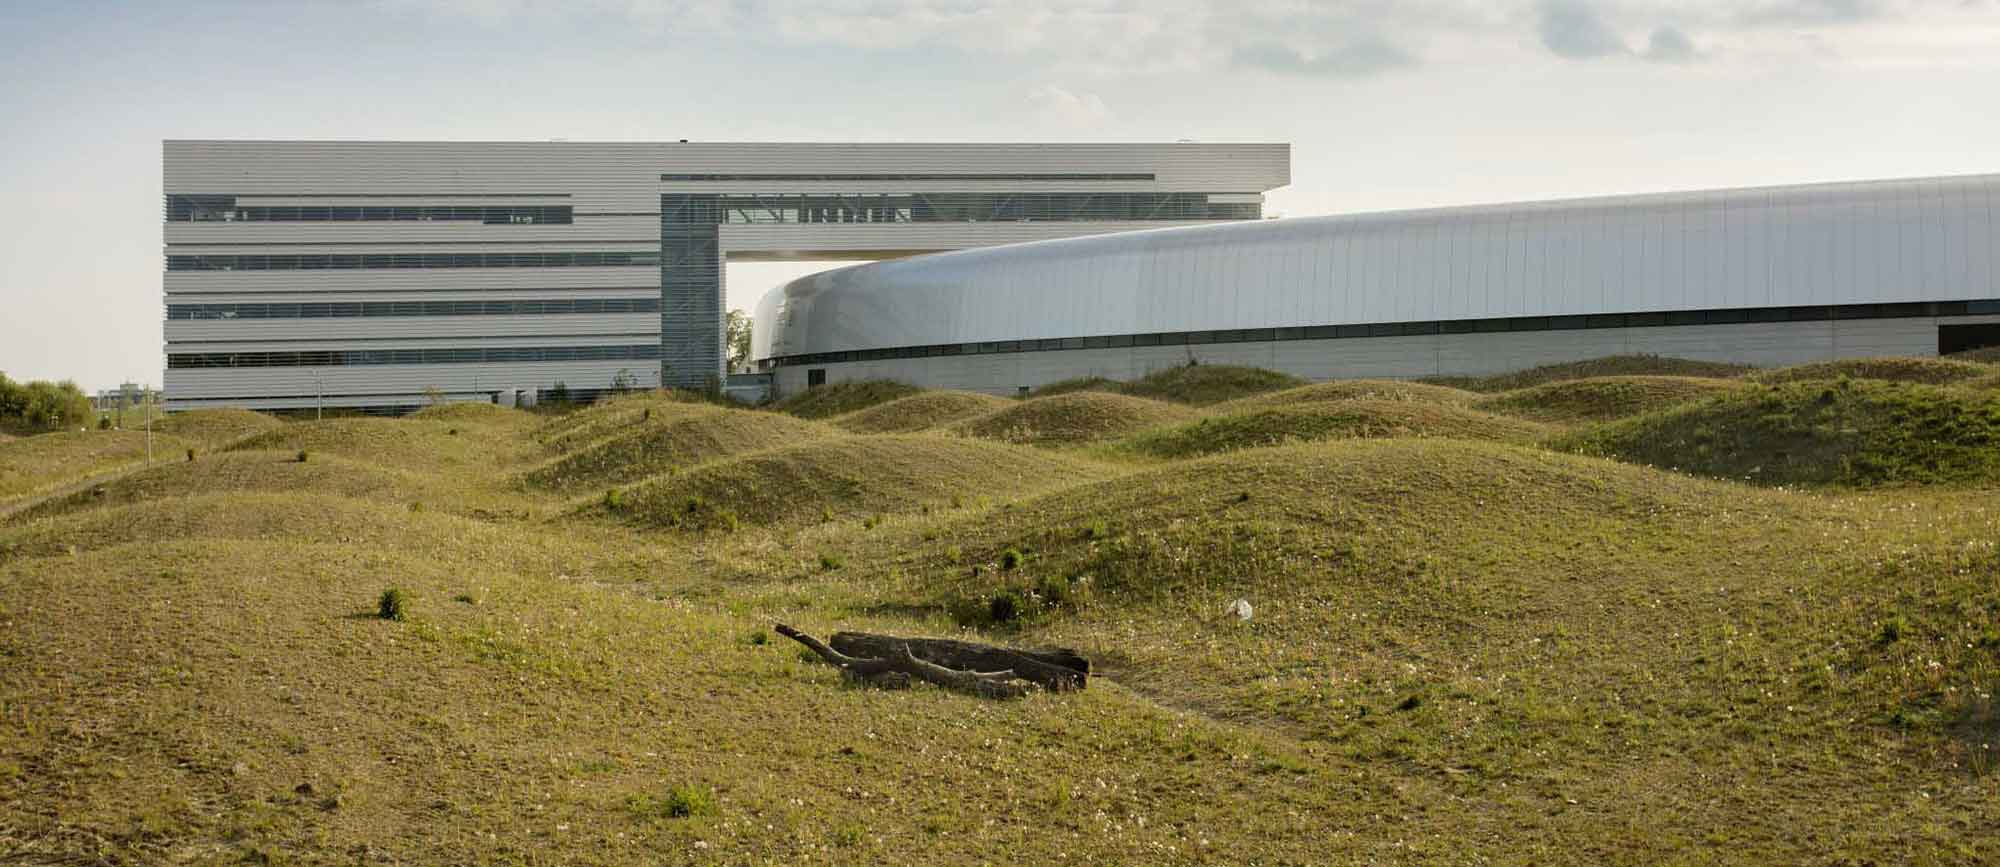 The MAX Lab facility uses a rippled spiral of topographic form to surround the main building.